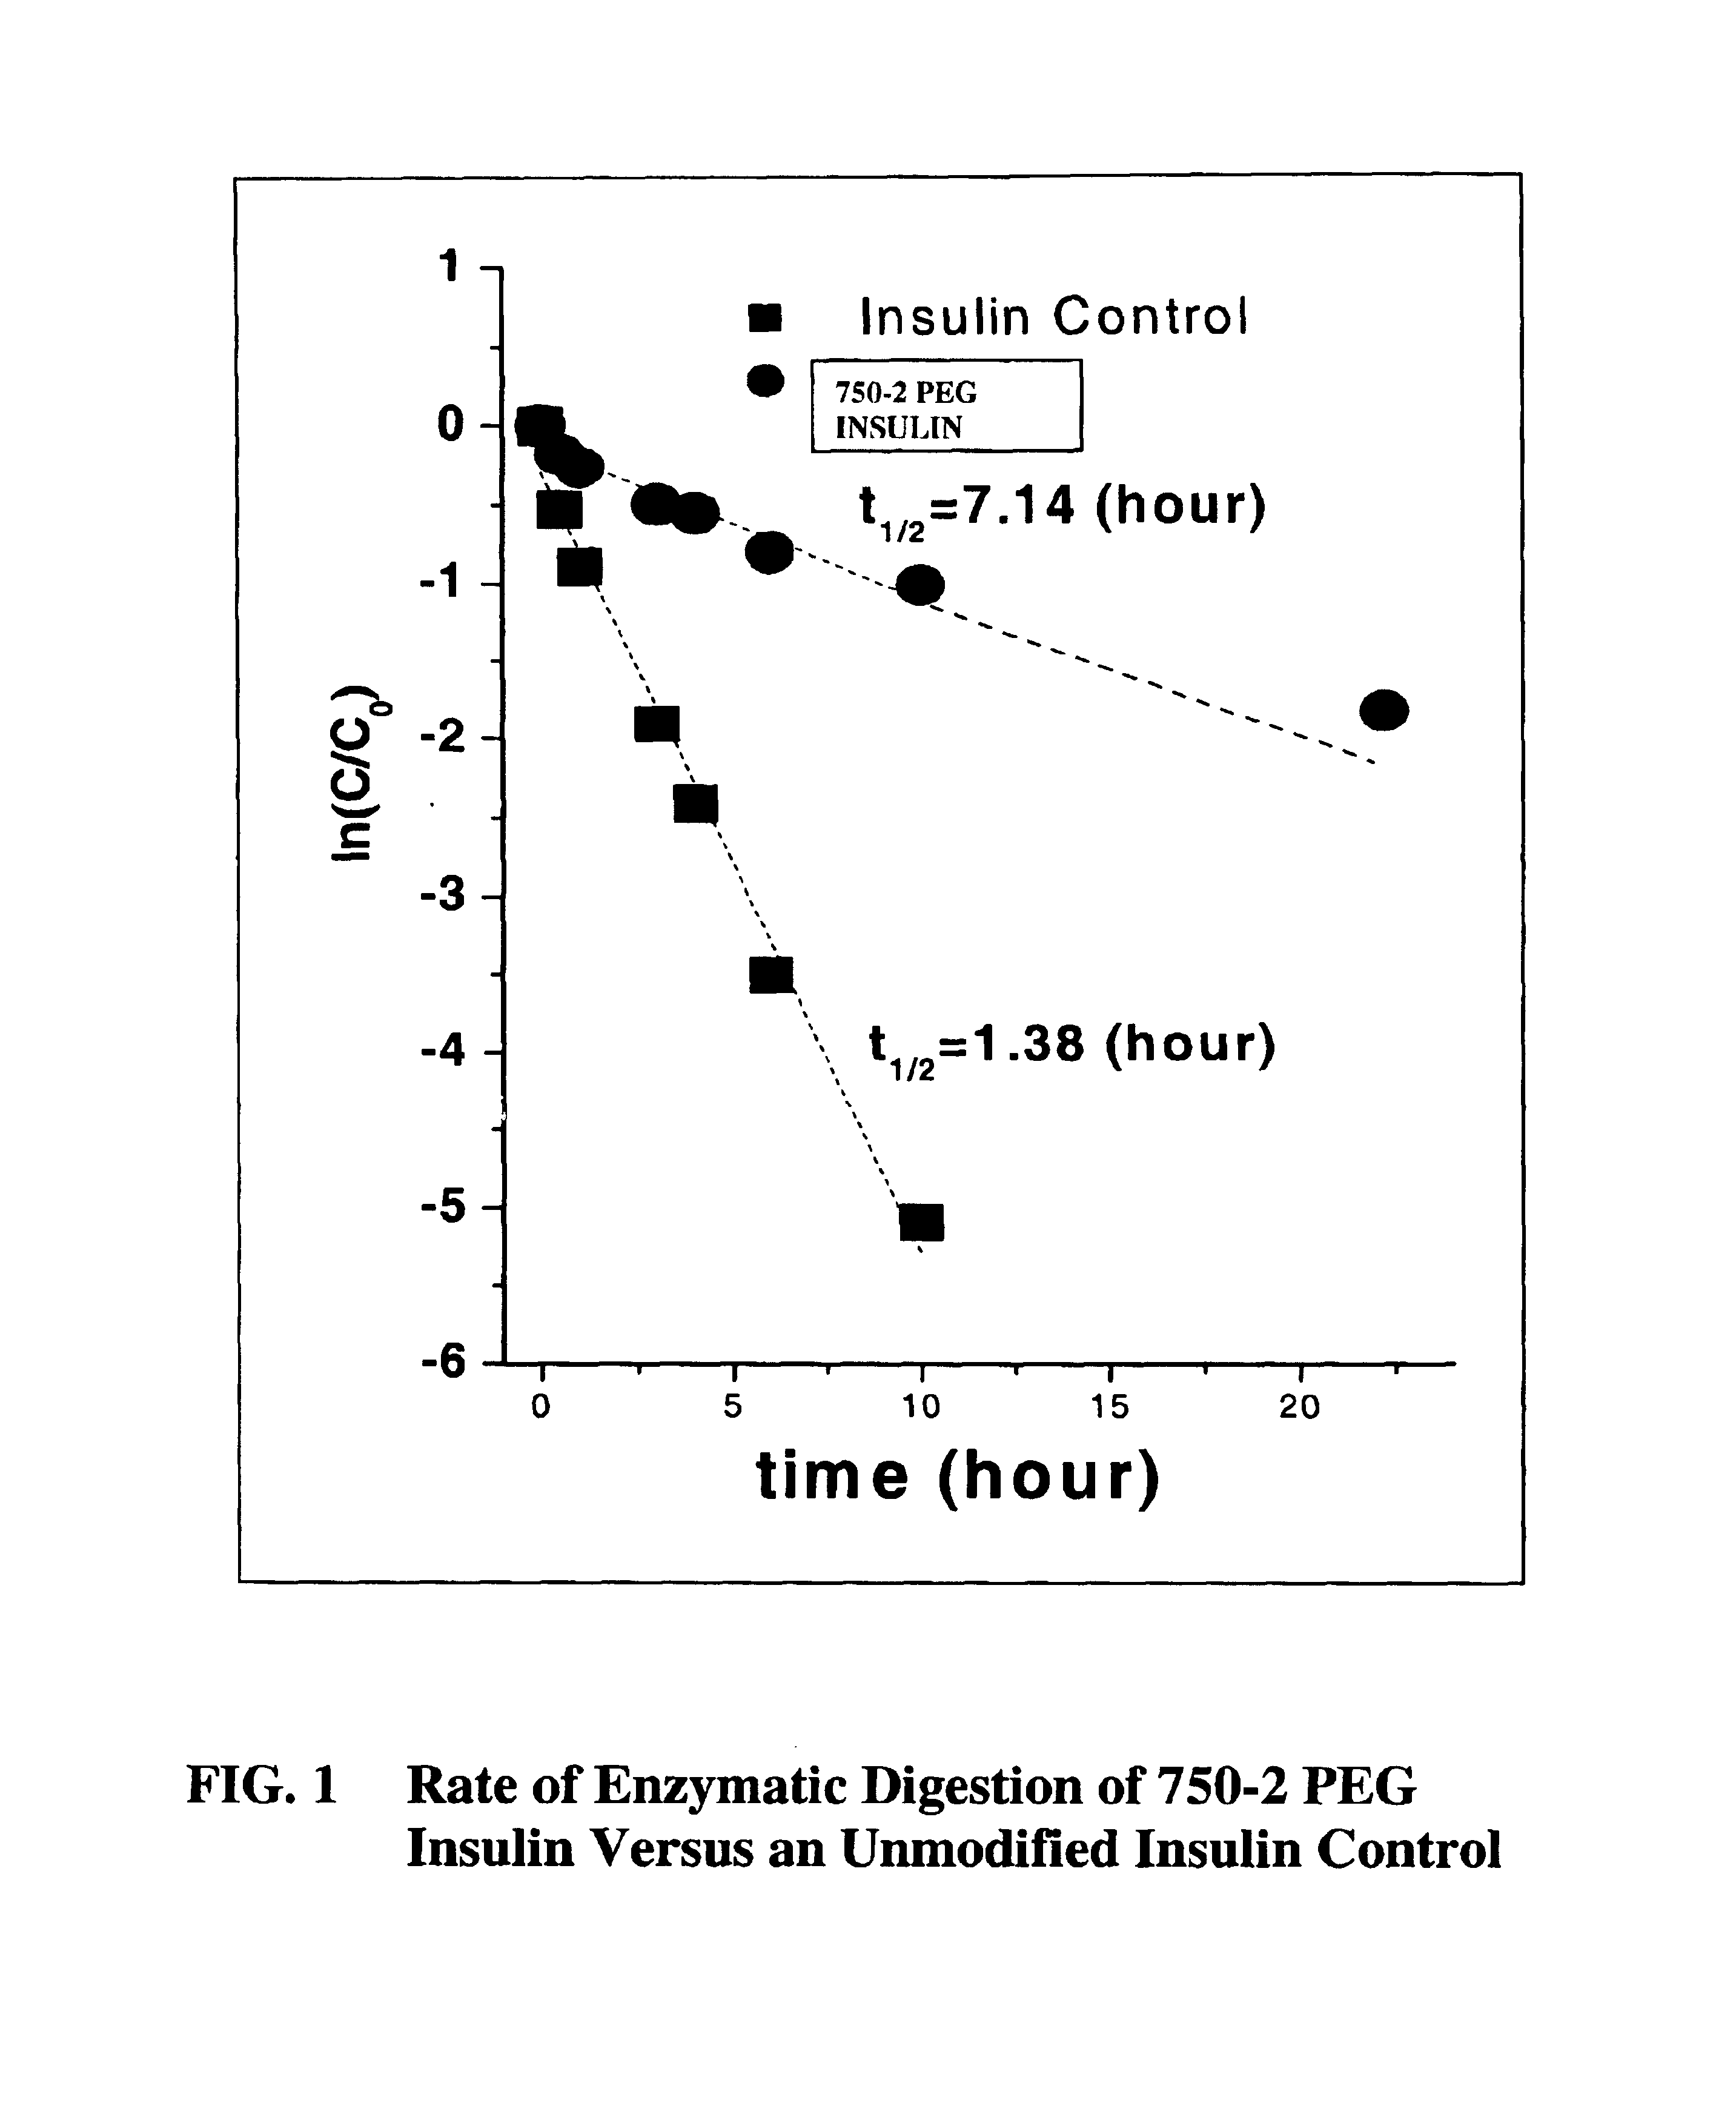 Compositions of chemically modified insulin